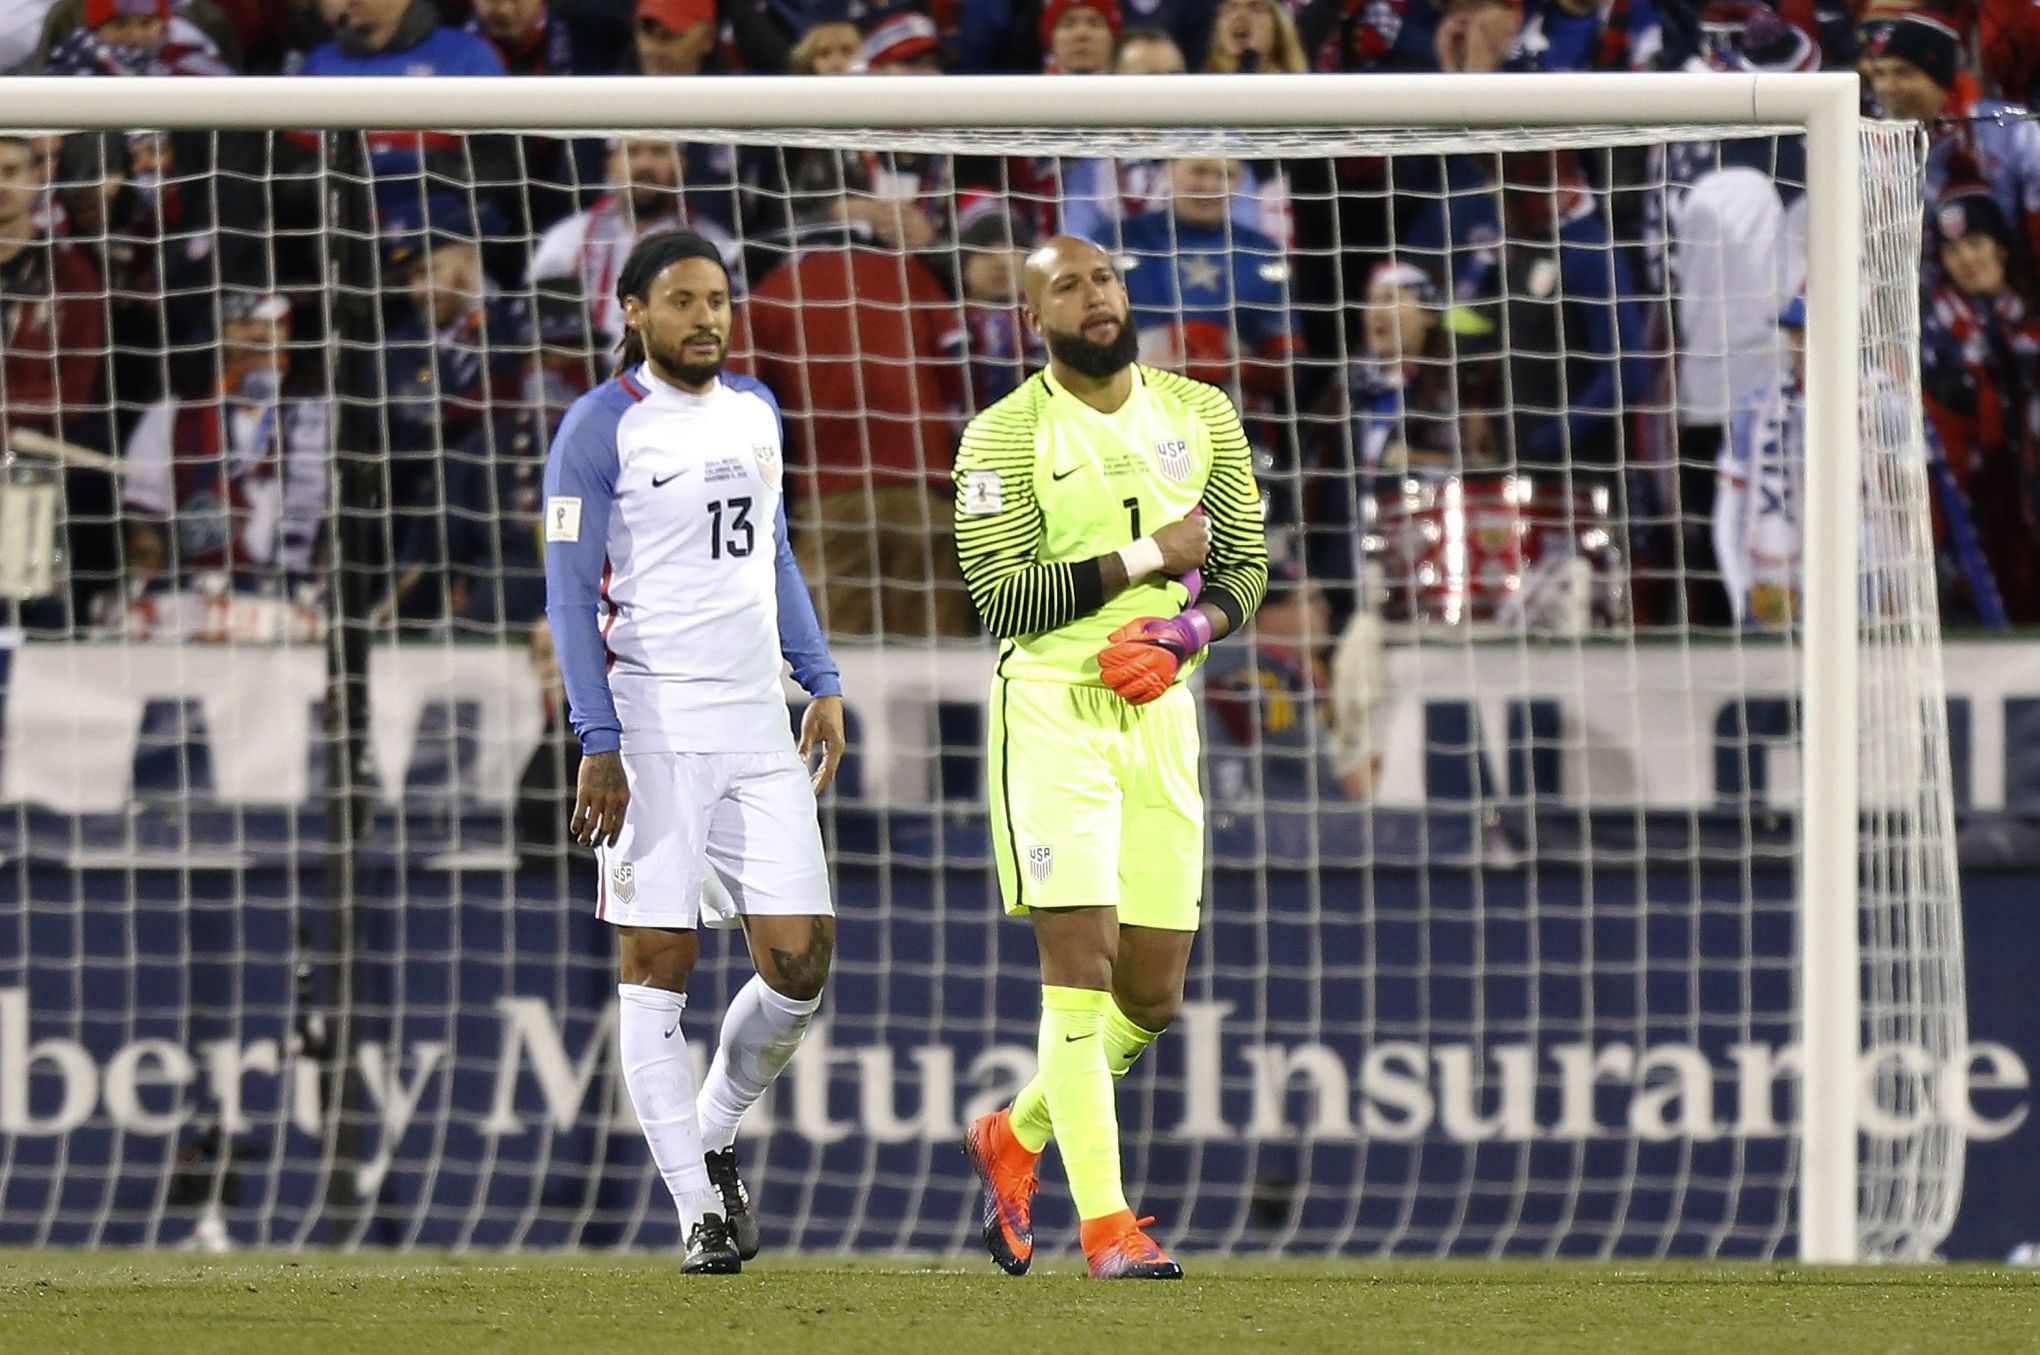 Tim Howard likely to miss US qualifiers - The San Diego Union-Tribune